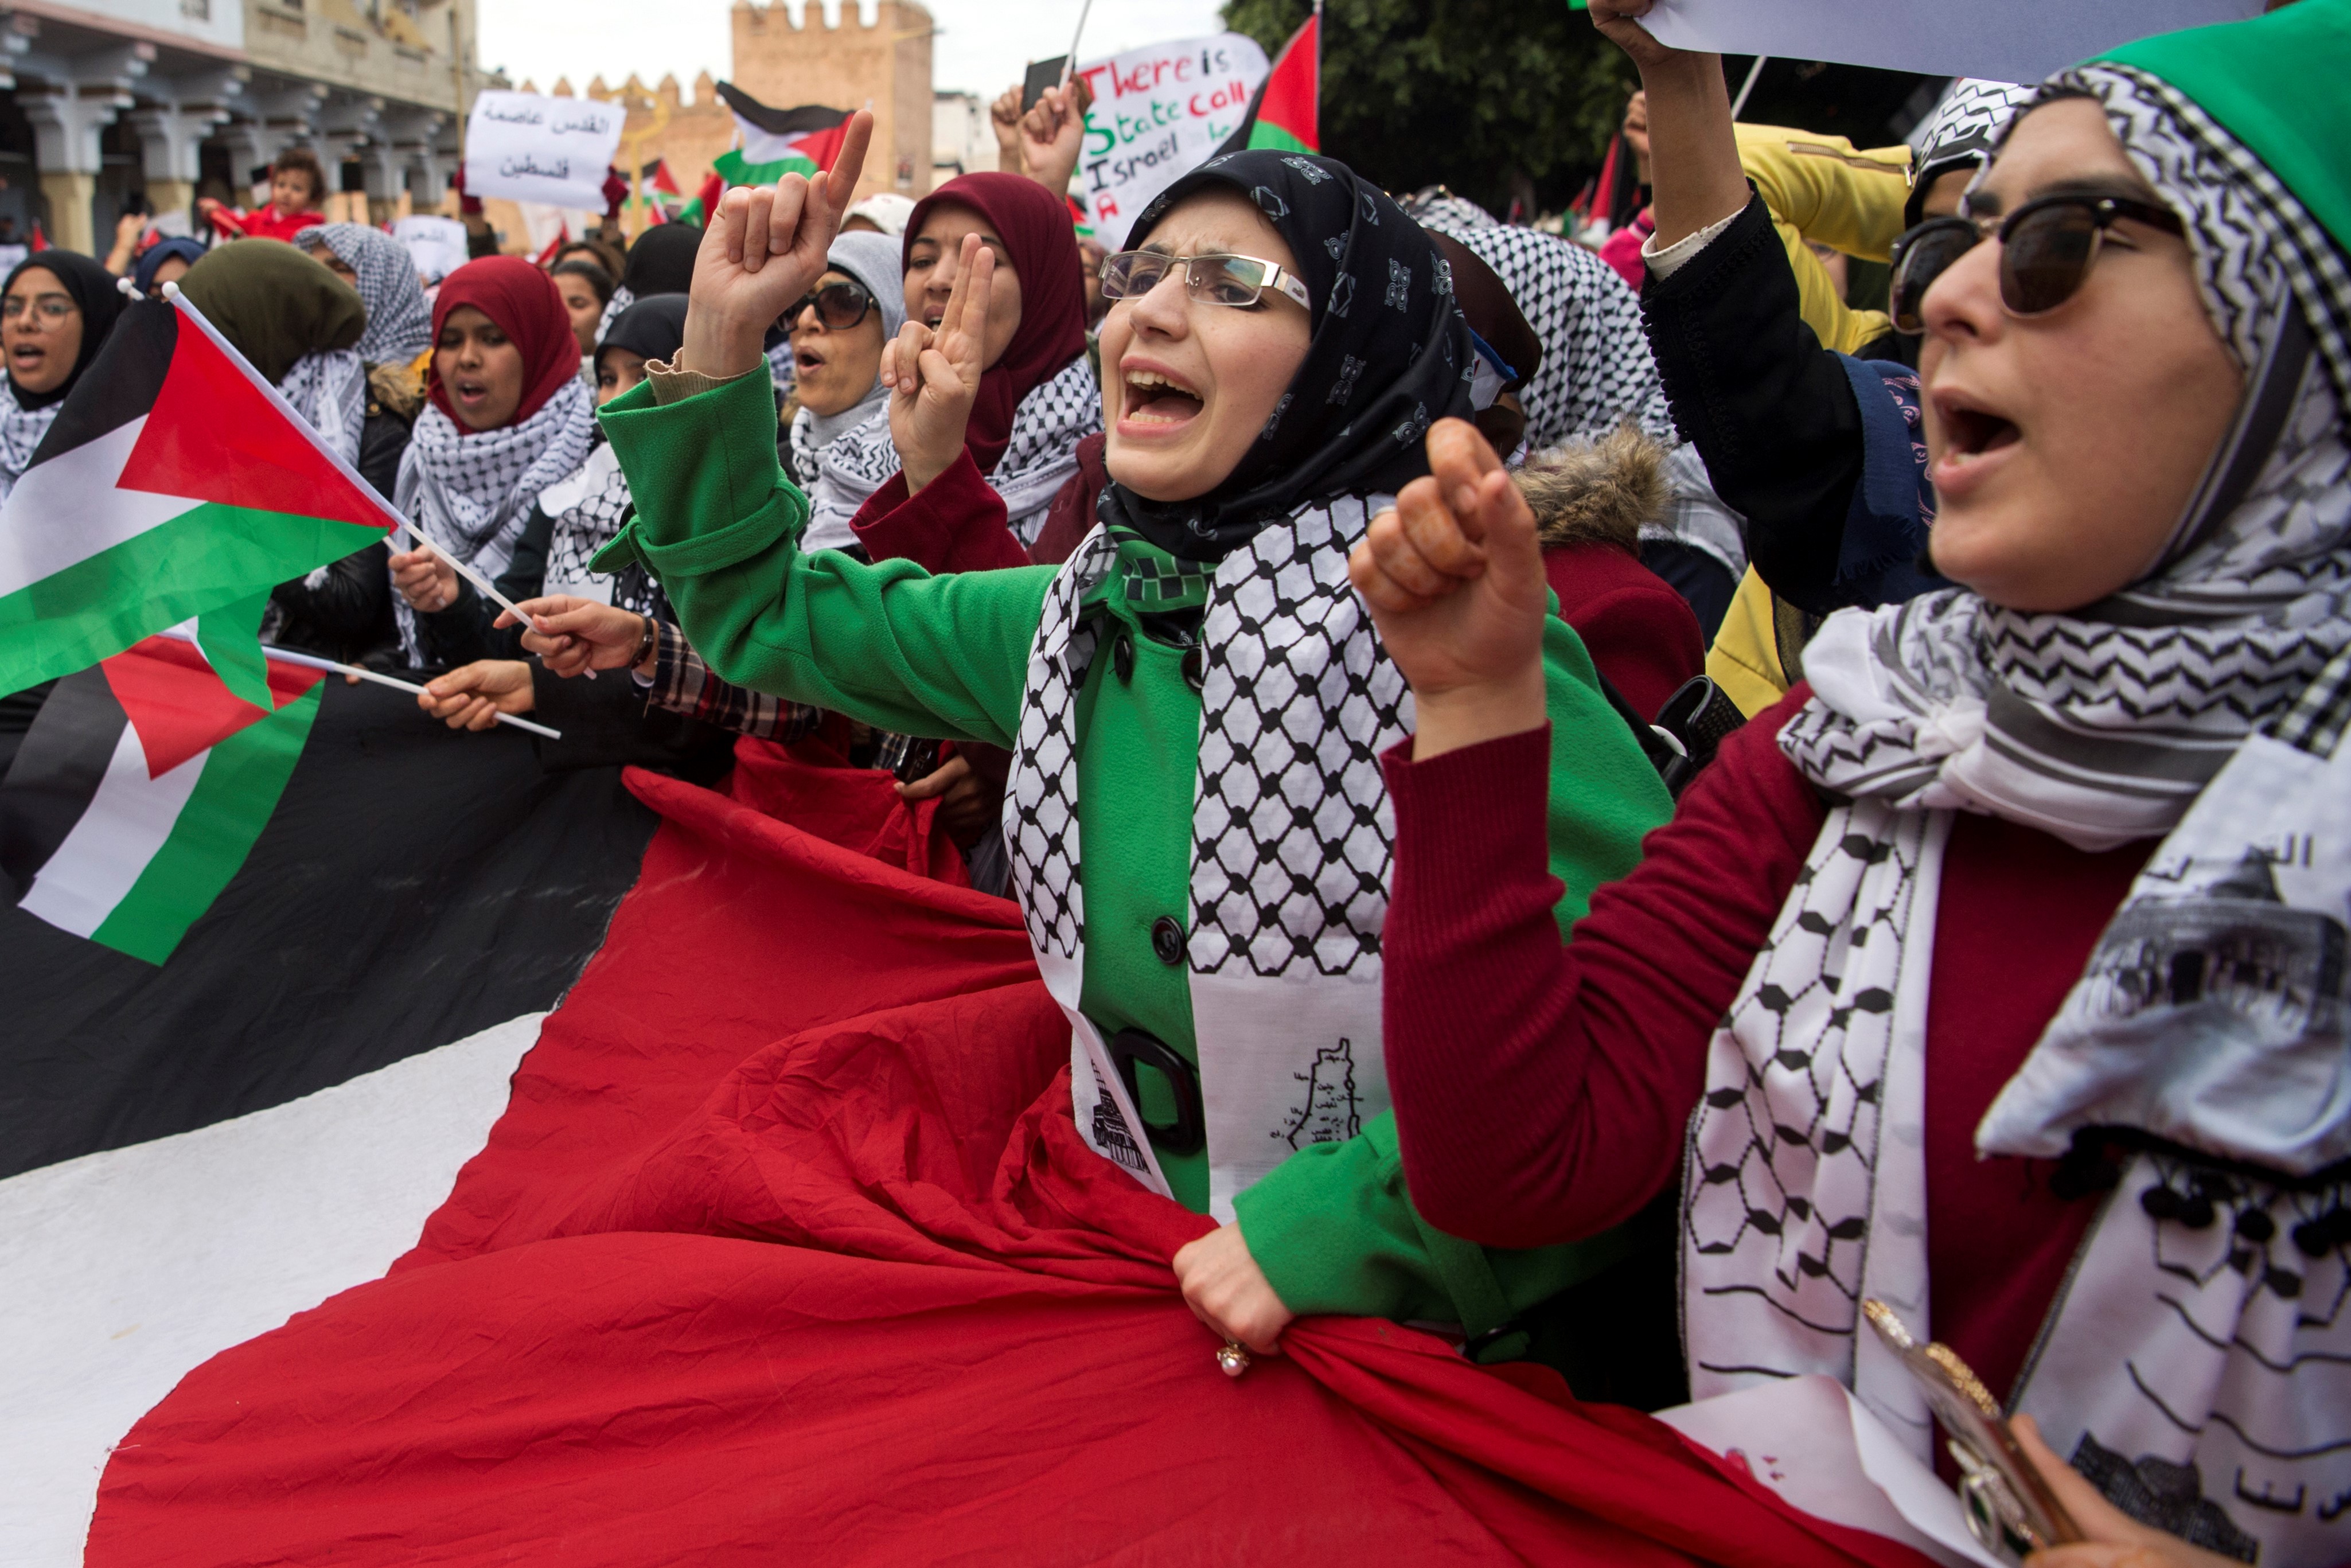  Pro-Palestinian protesters wave Palestinian flags and chant slogans against the US and Israel on December 10, 2017 in Rabat against